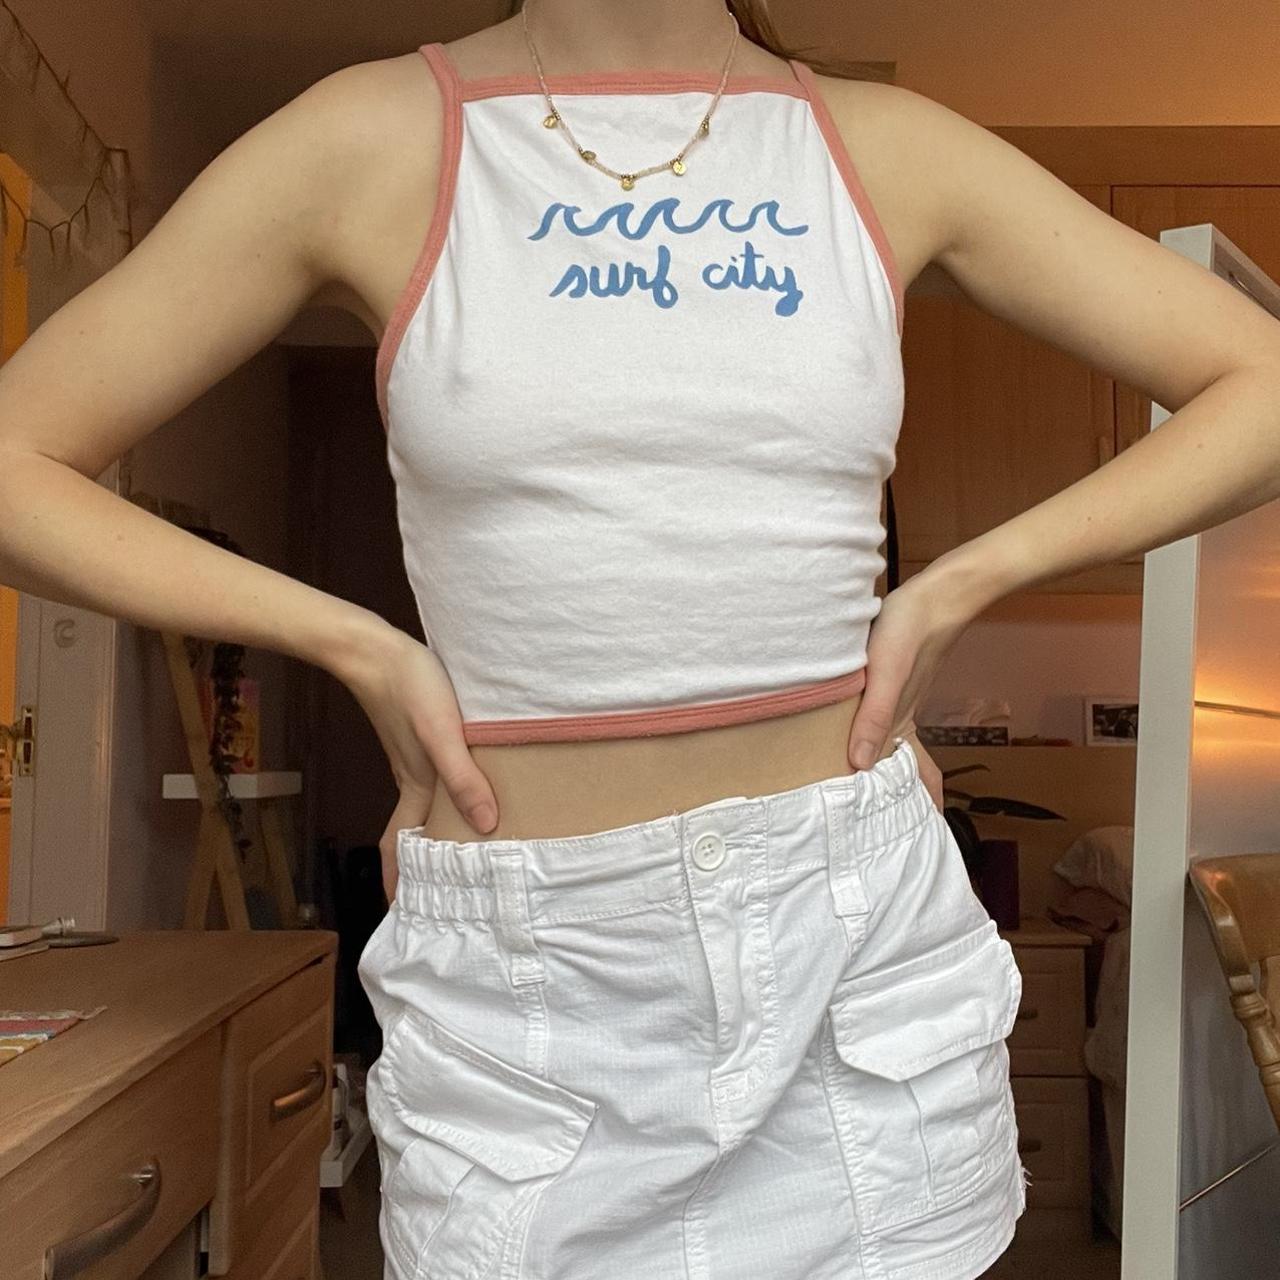 Urban outfitters “surf city” white halter crop top,... - Depop